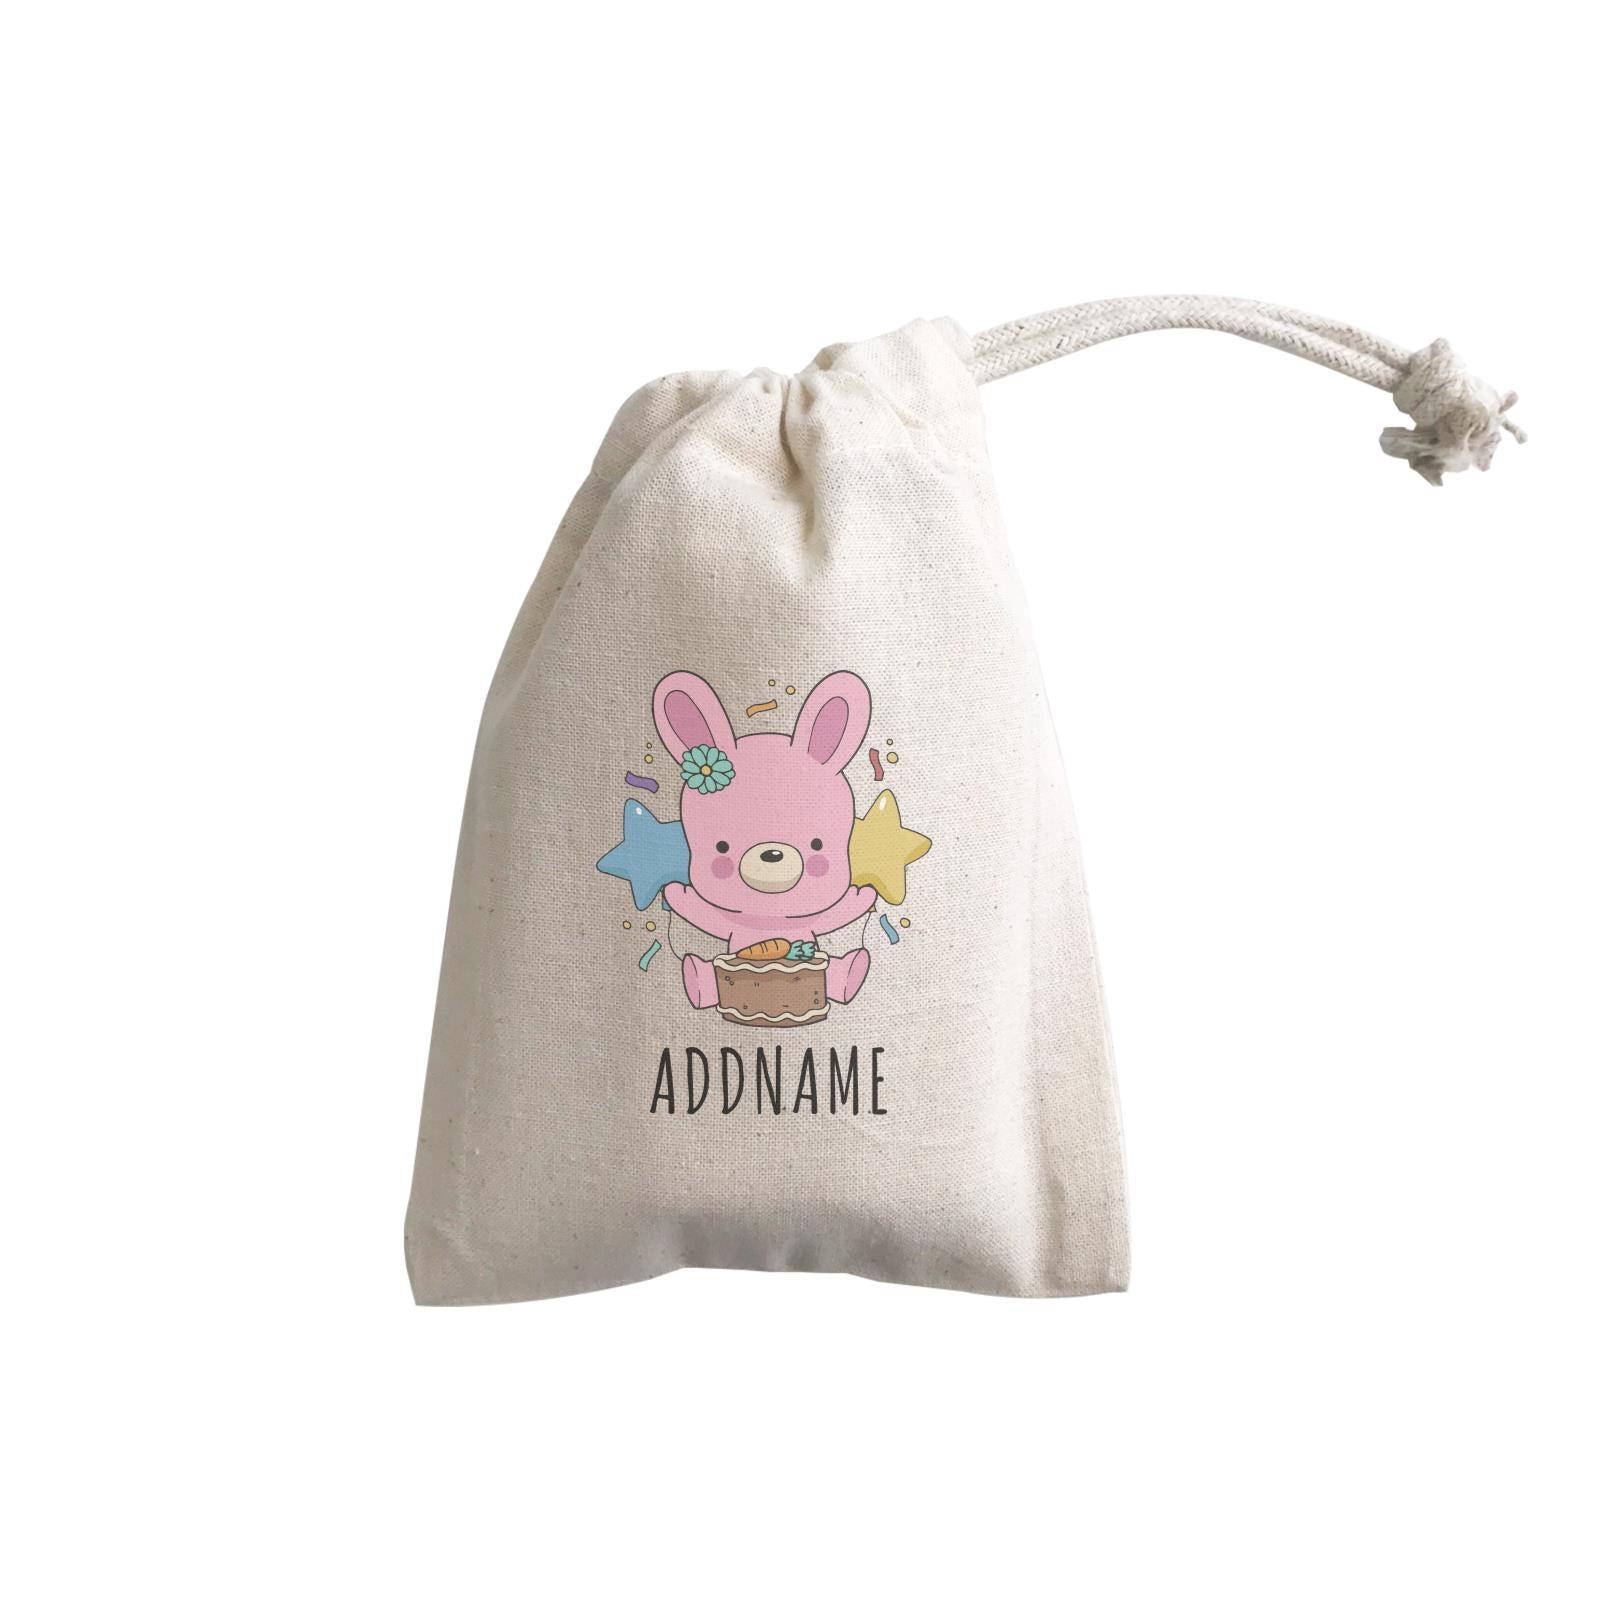 Birthday Sketch Animals Rabbit with Carrot Cake Addname GP Gift Pouch